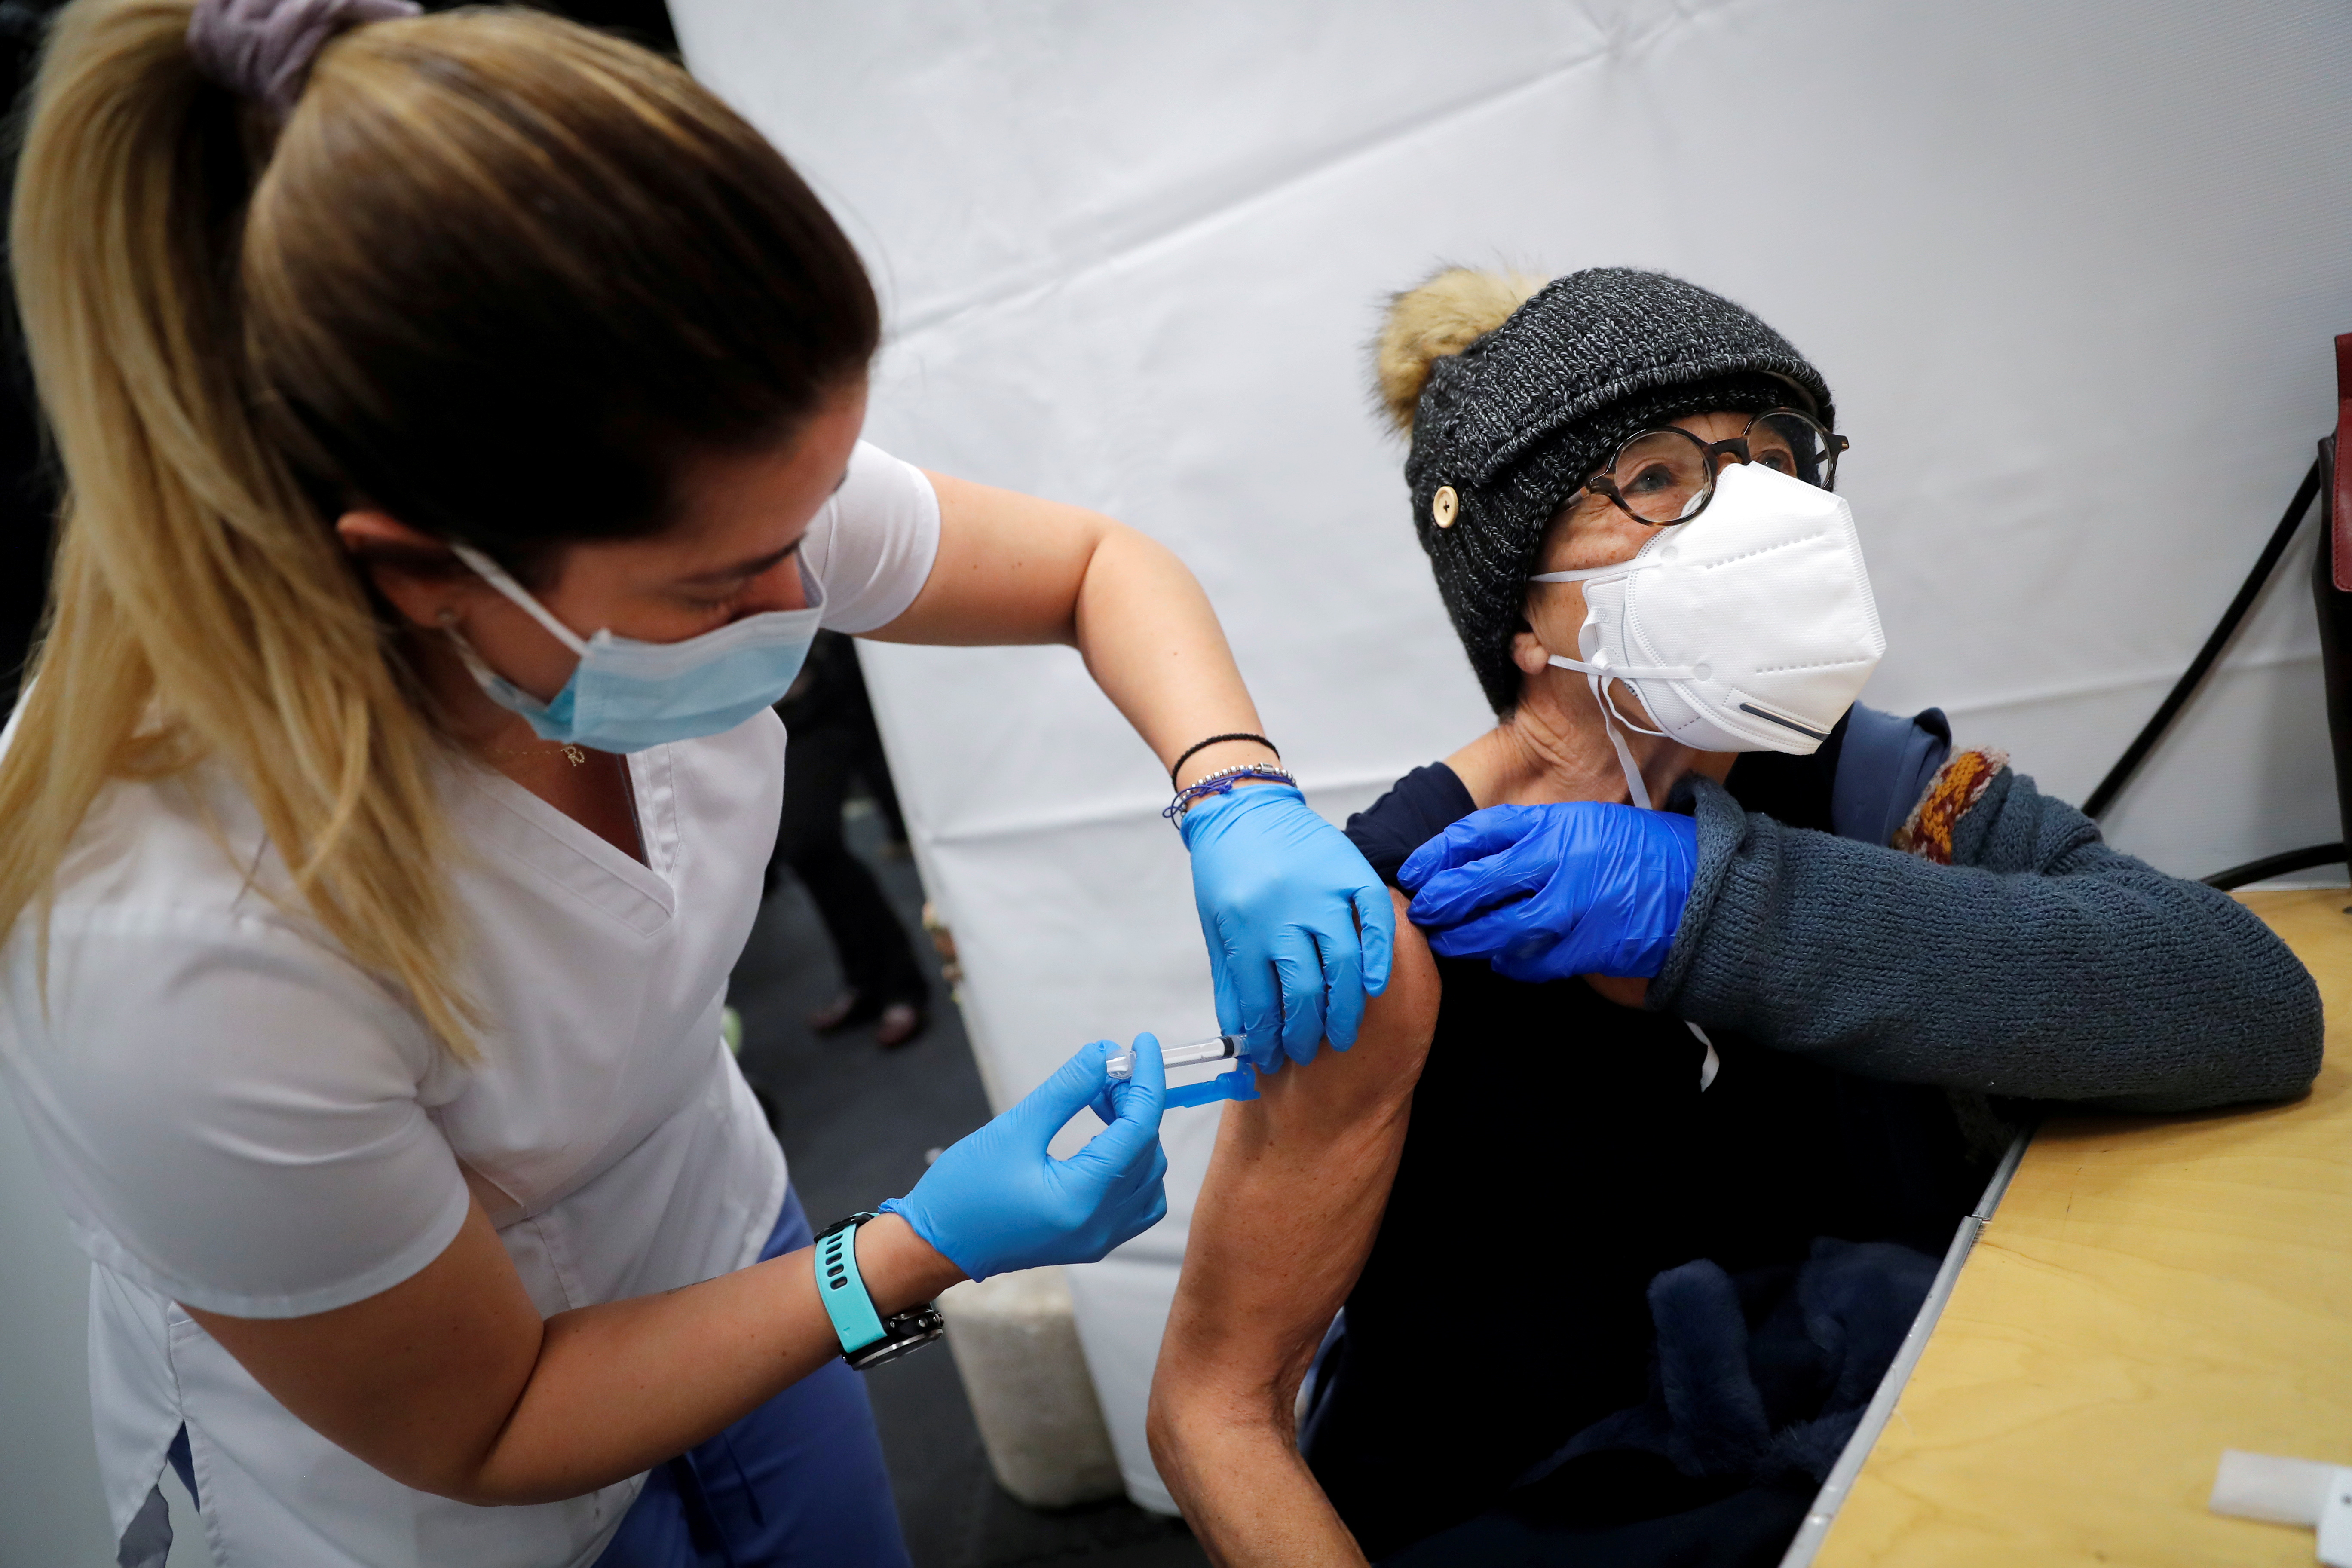 A healthcare worker administers a shot of the Moderna COVID-19 vaccine to a woman at a pop-up vaccination site operated by SOMOS Community Care in Manhattan, Jan. 29, 2021.